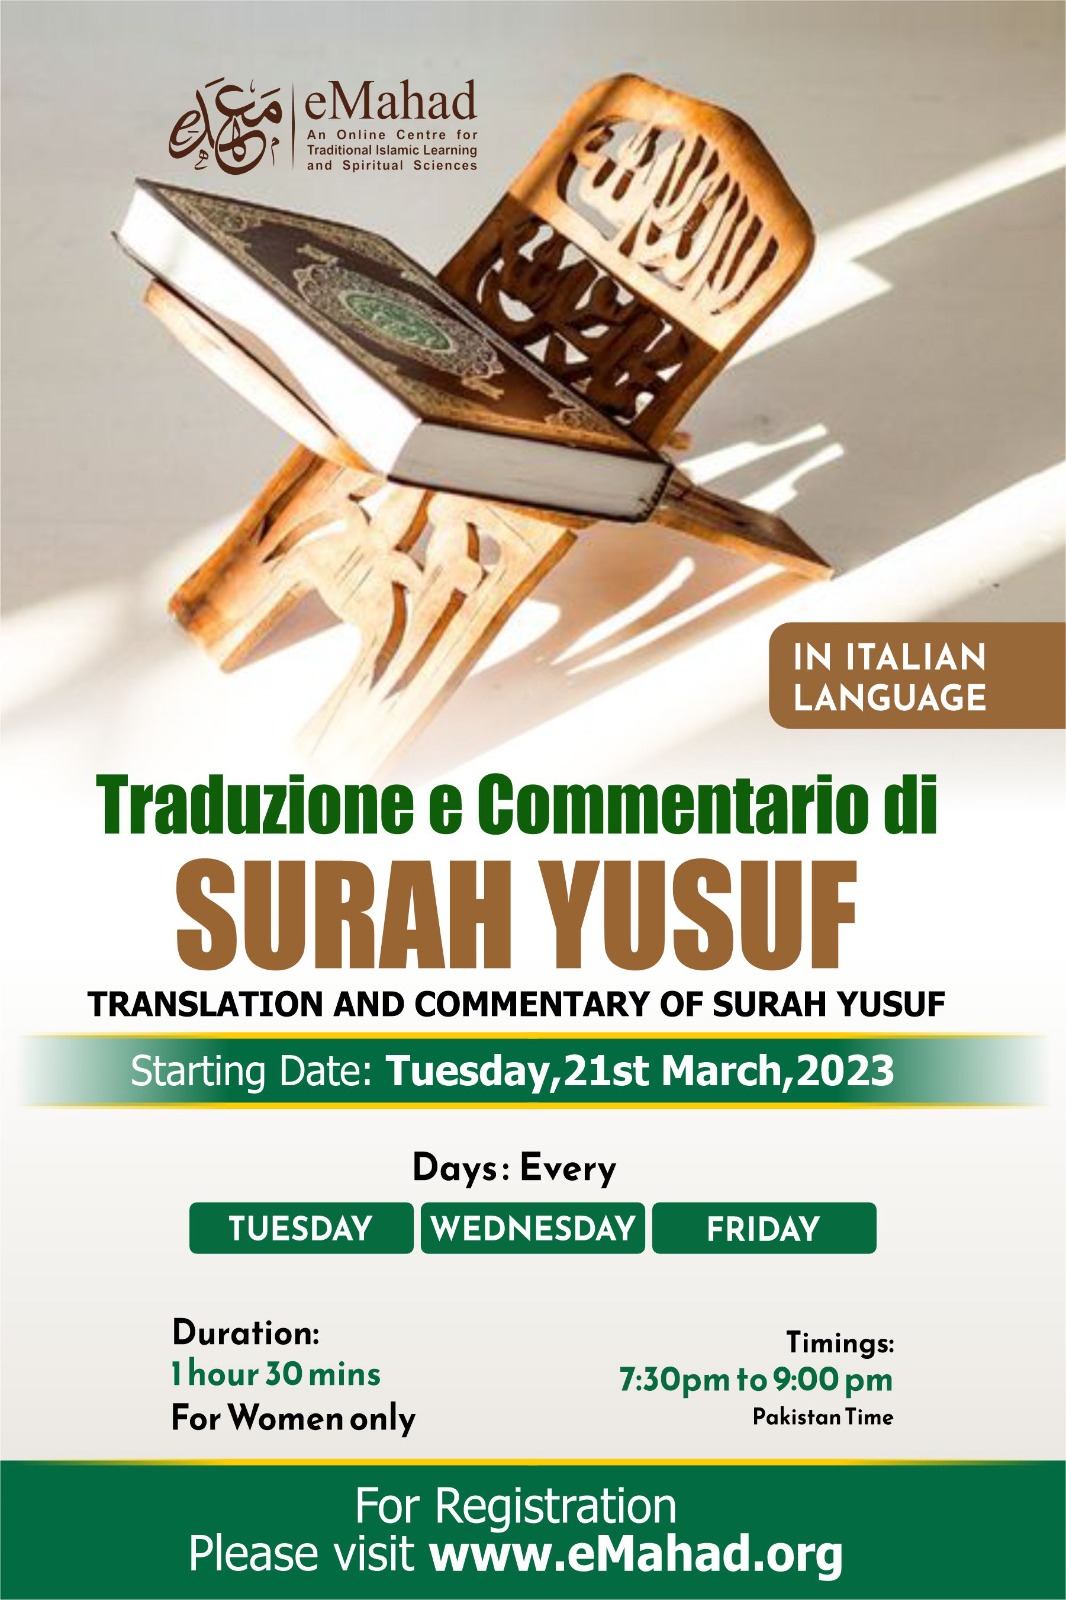 Traduzione e Commentario di Surah Yusuf  -  Translation and Commentary of Surah Yusuf  2023  |  Free Online Ramadan Tafseer Course   | In Italian Language  |  Only For Sisters